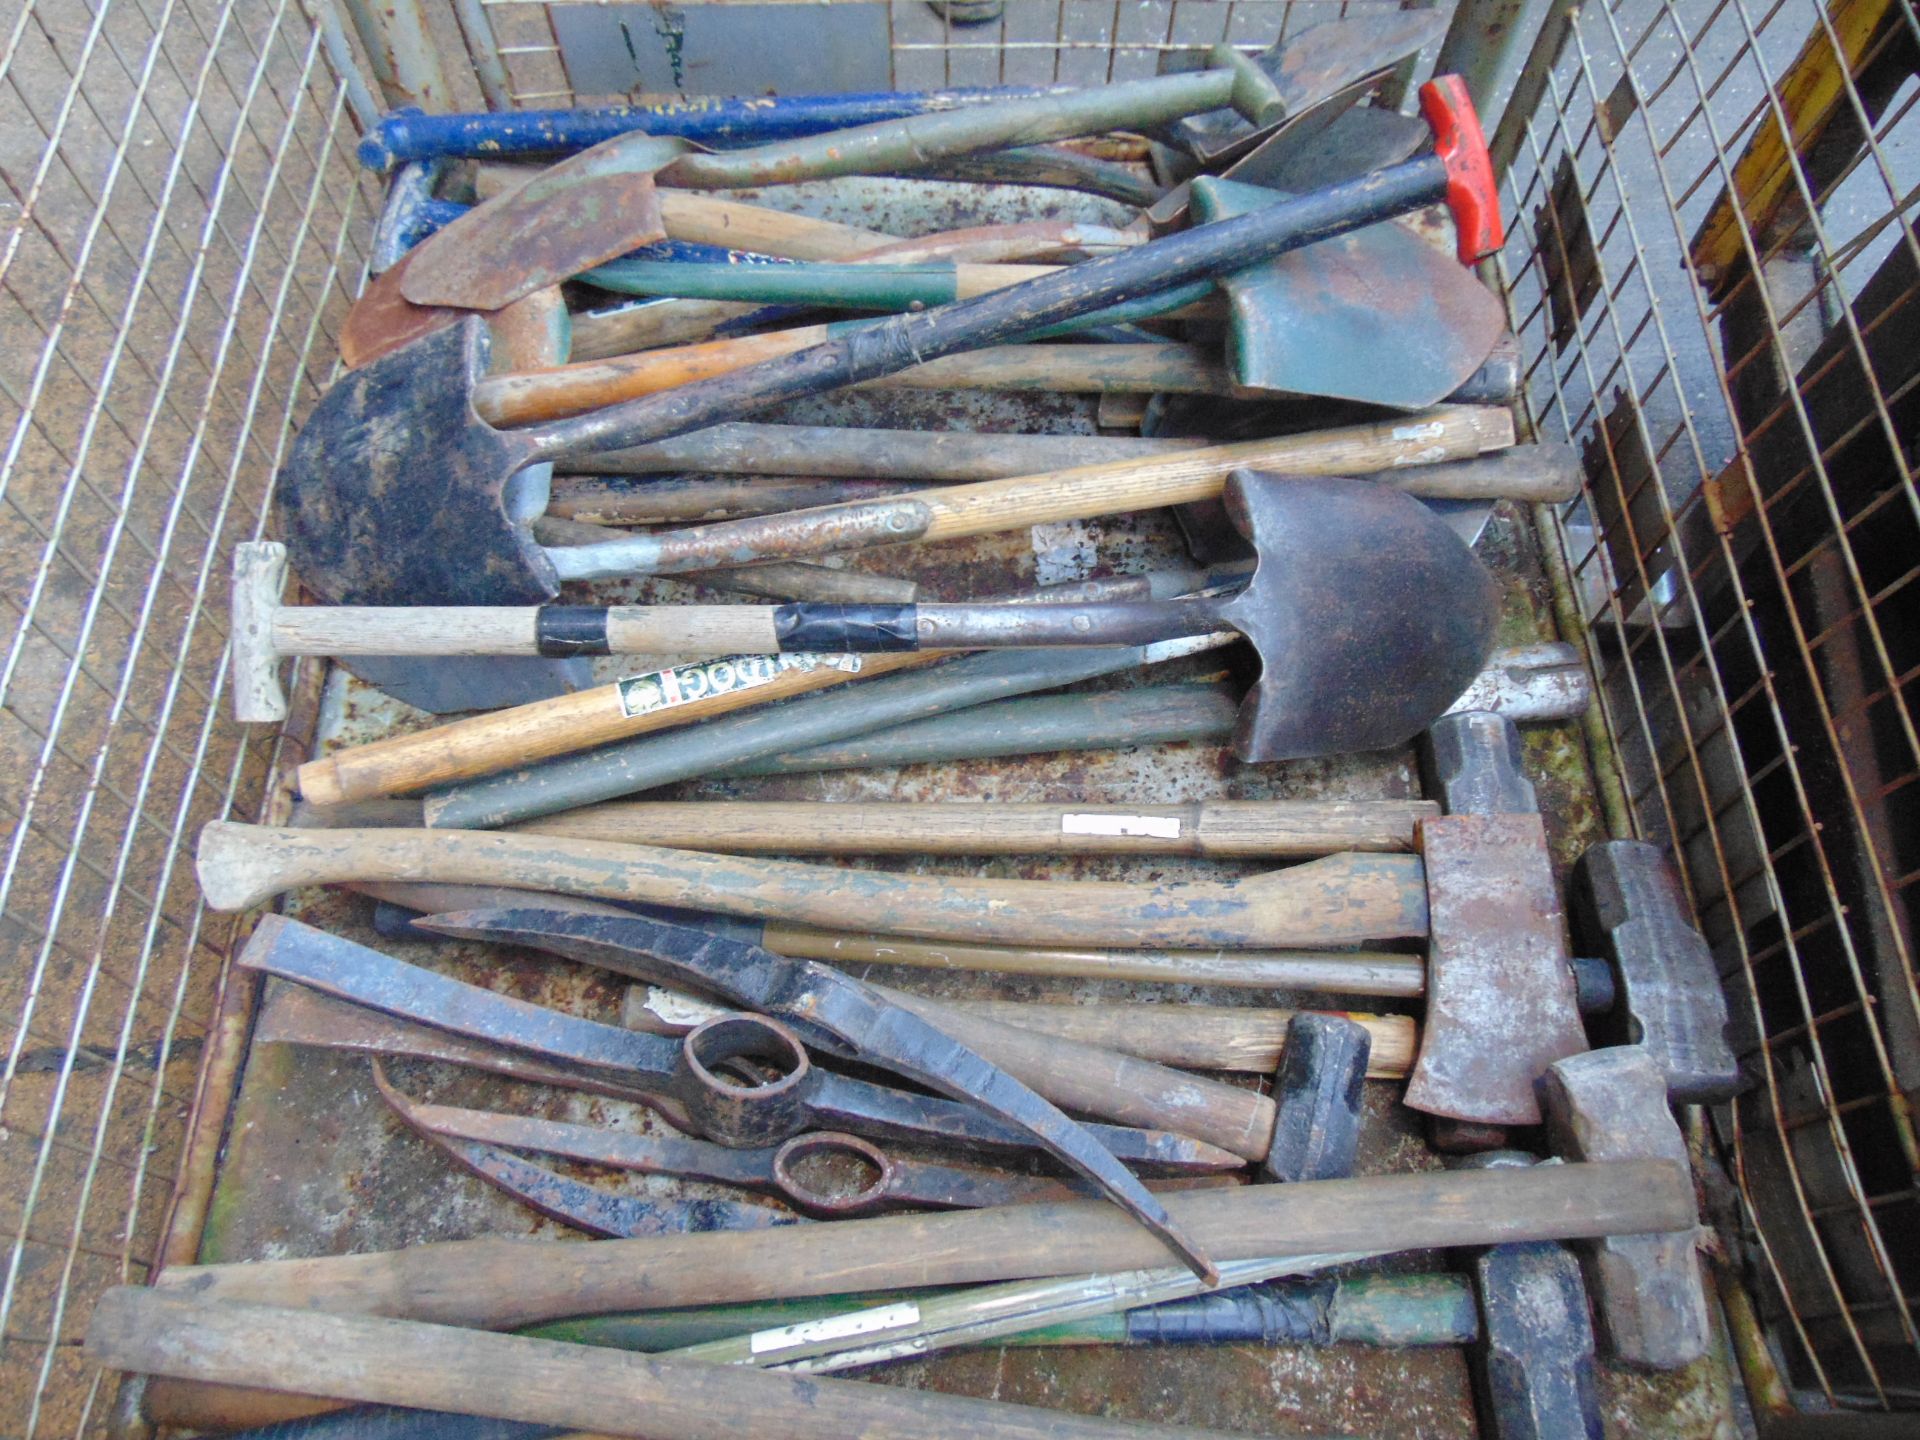 1 x Stillage 30+ British Army Pioneer Picks, Shovels, Axes and Sledge Hammers - Image 3 of 5